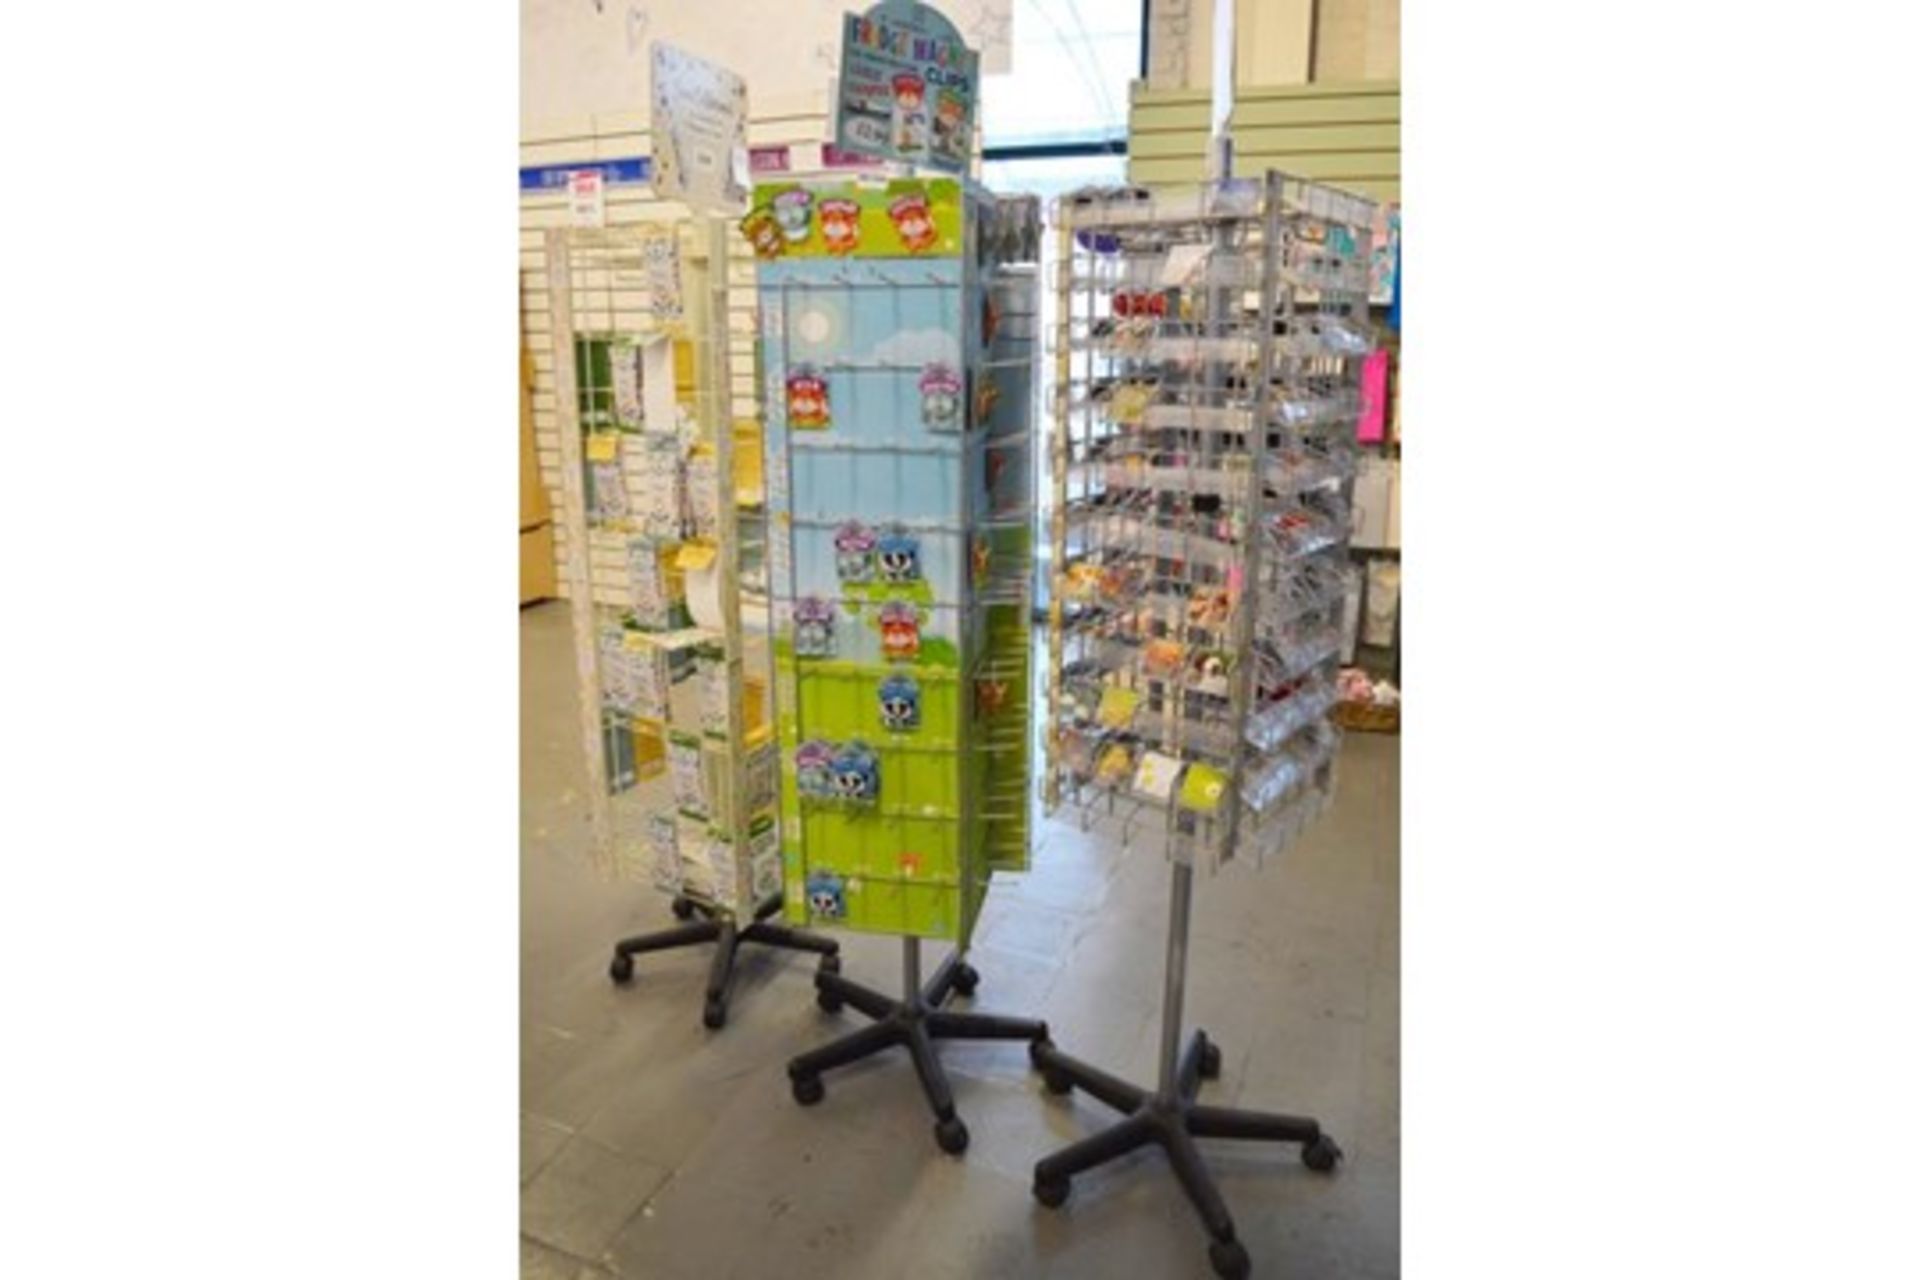 27 x Retail Carousel Display Stands With Approximately 2,800 Items of Resale Stock - Includes - Image 35 of 61